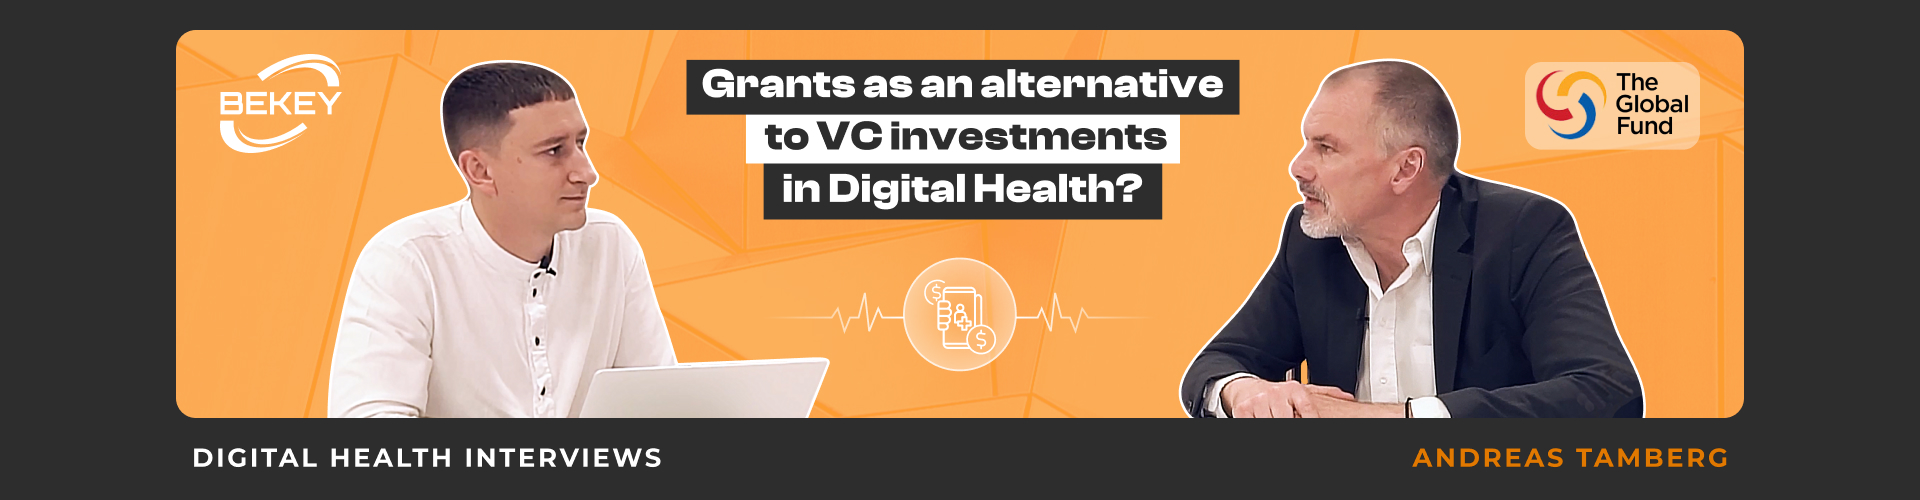 Grants as an Alternative to VC Investments in Digital Health. Digital Health Interviews: Andreas Tamberg - image